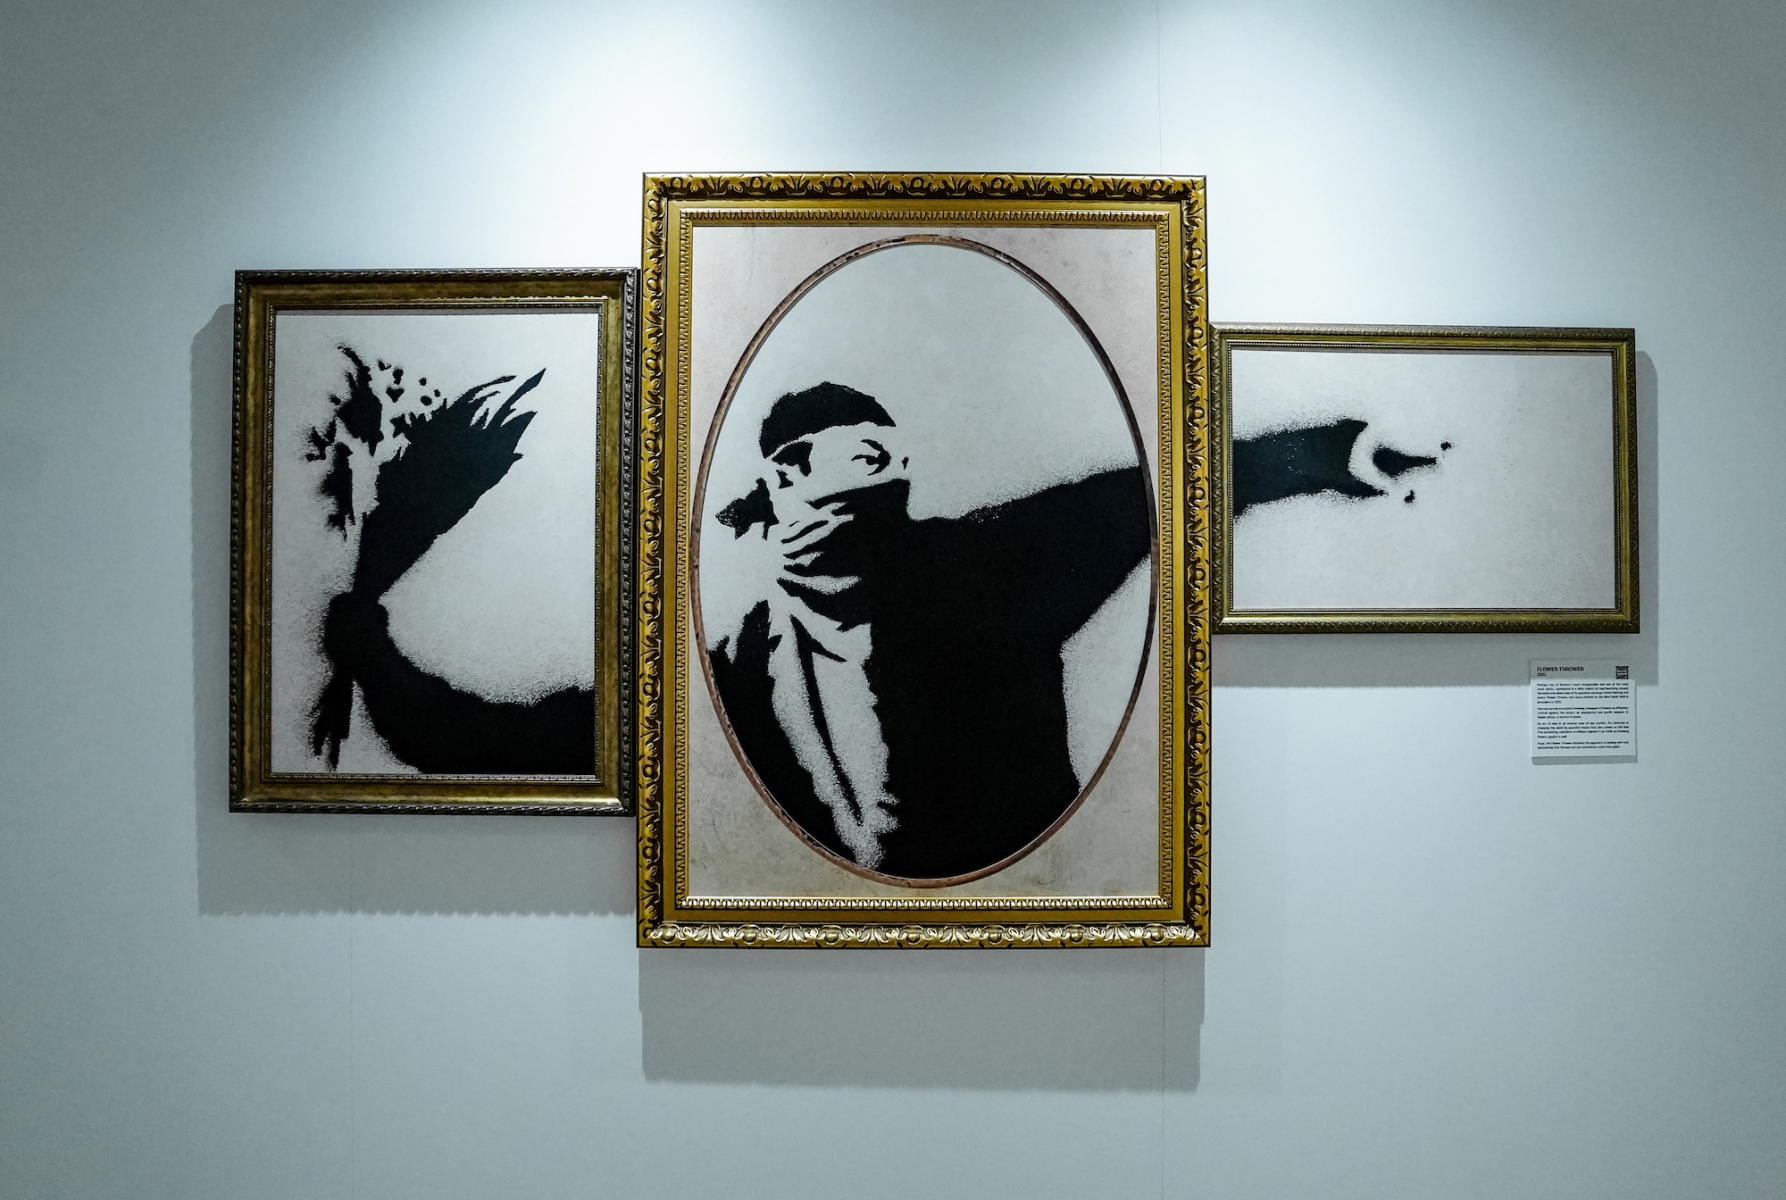 Three black and white stencil graffiti images in golden frames depict a masked man throwing flowers